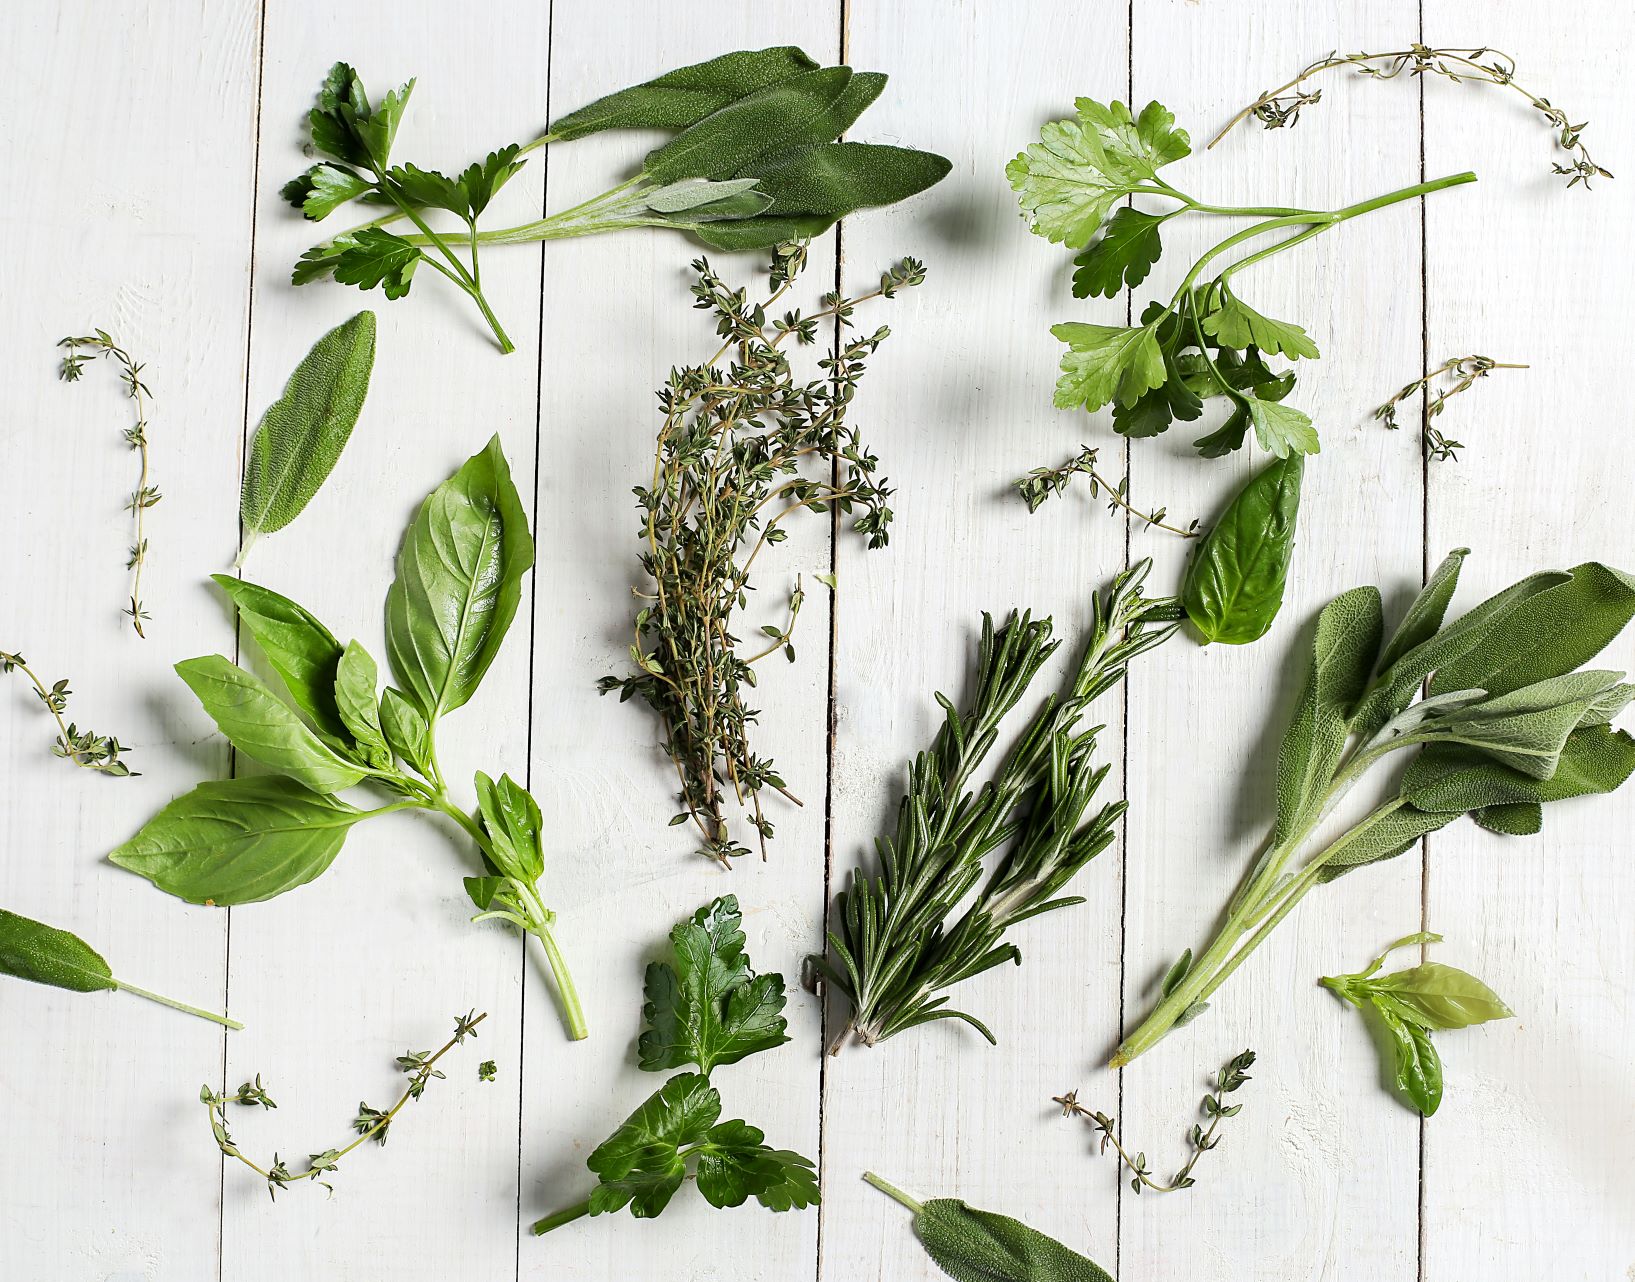 Organic Herb Spices - Taste Therapy for Delicate Delicacies